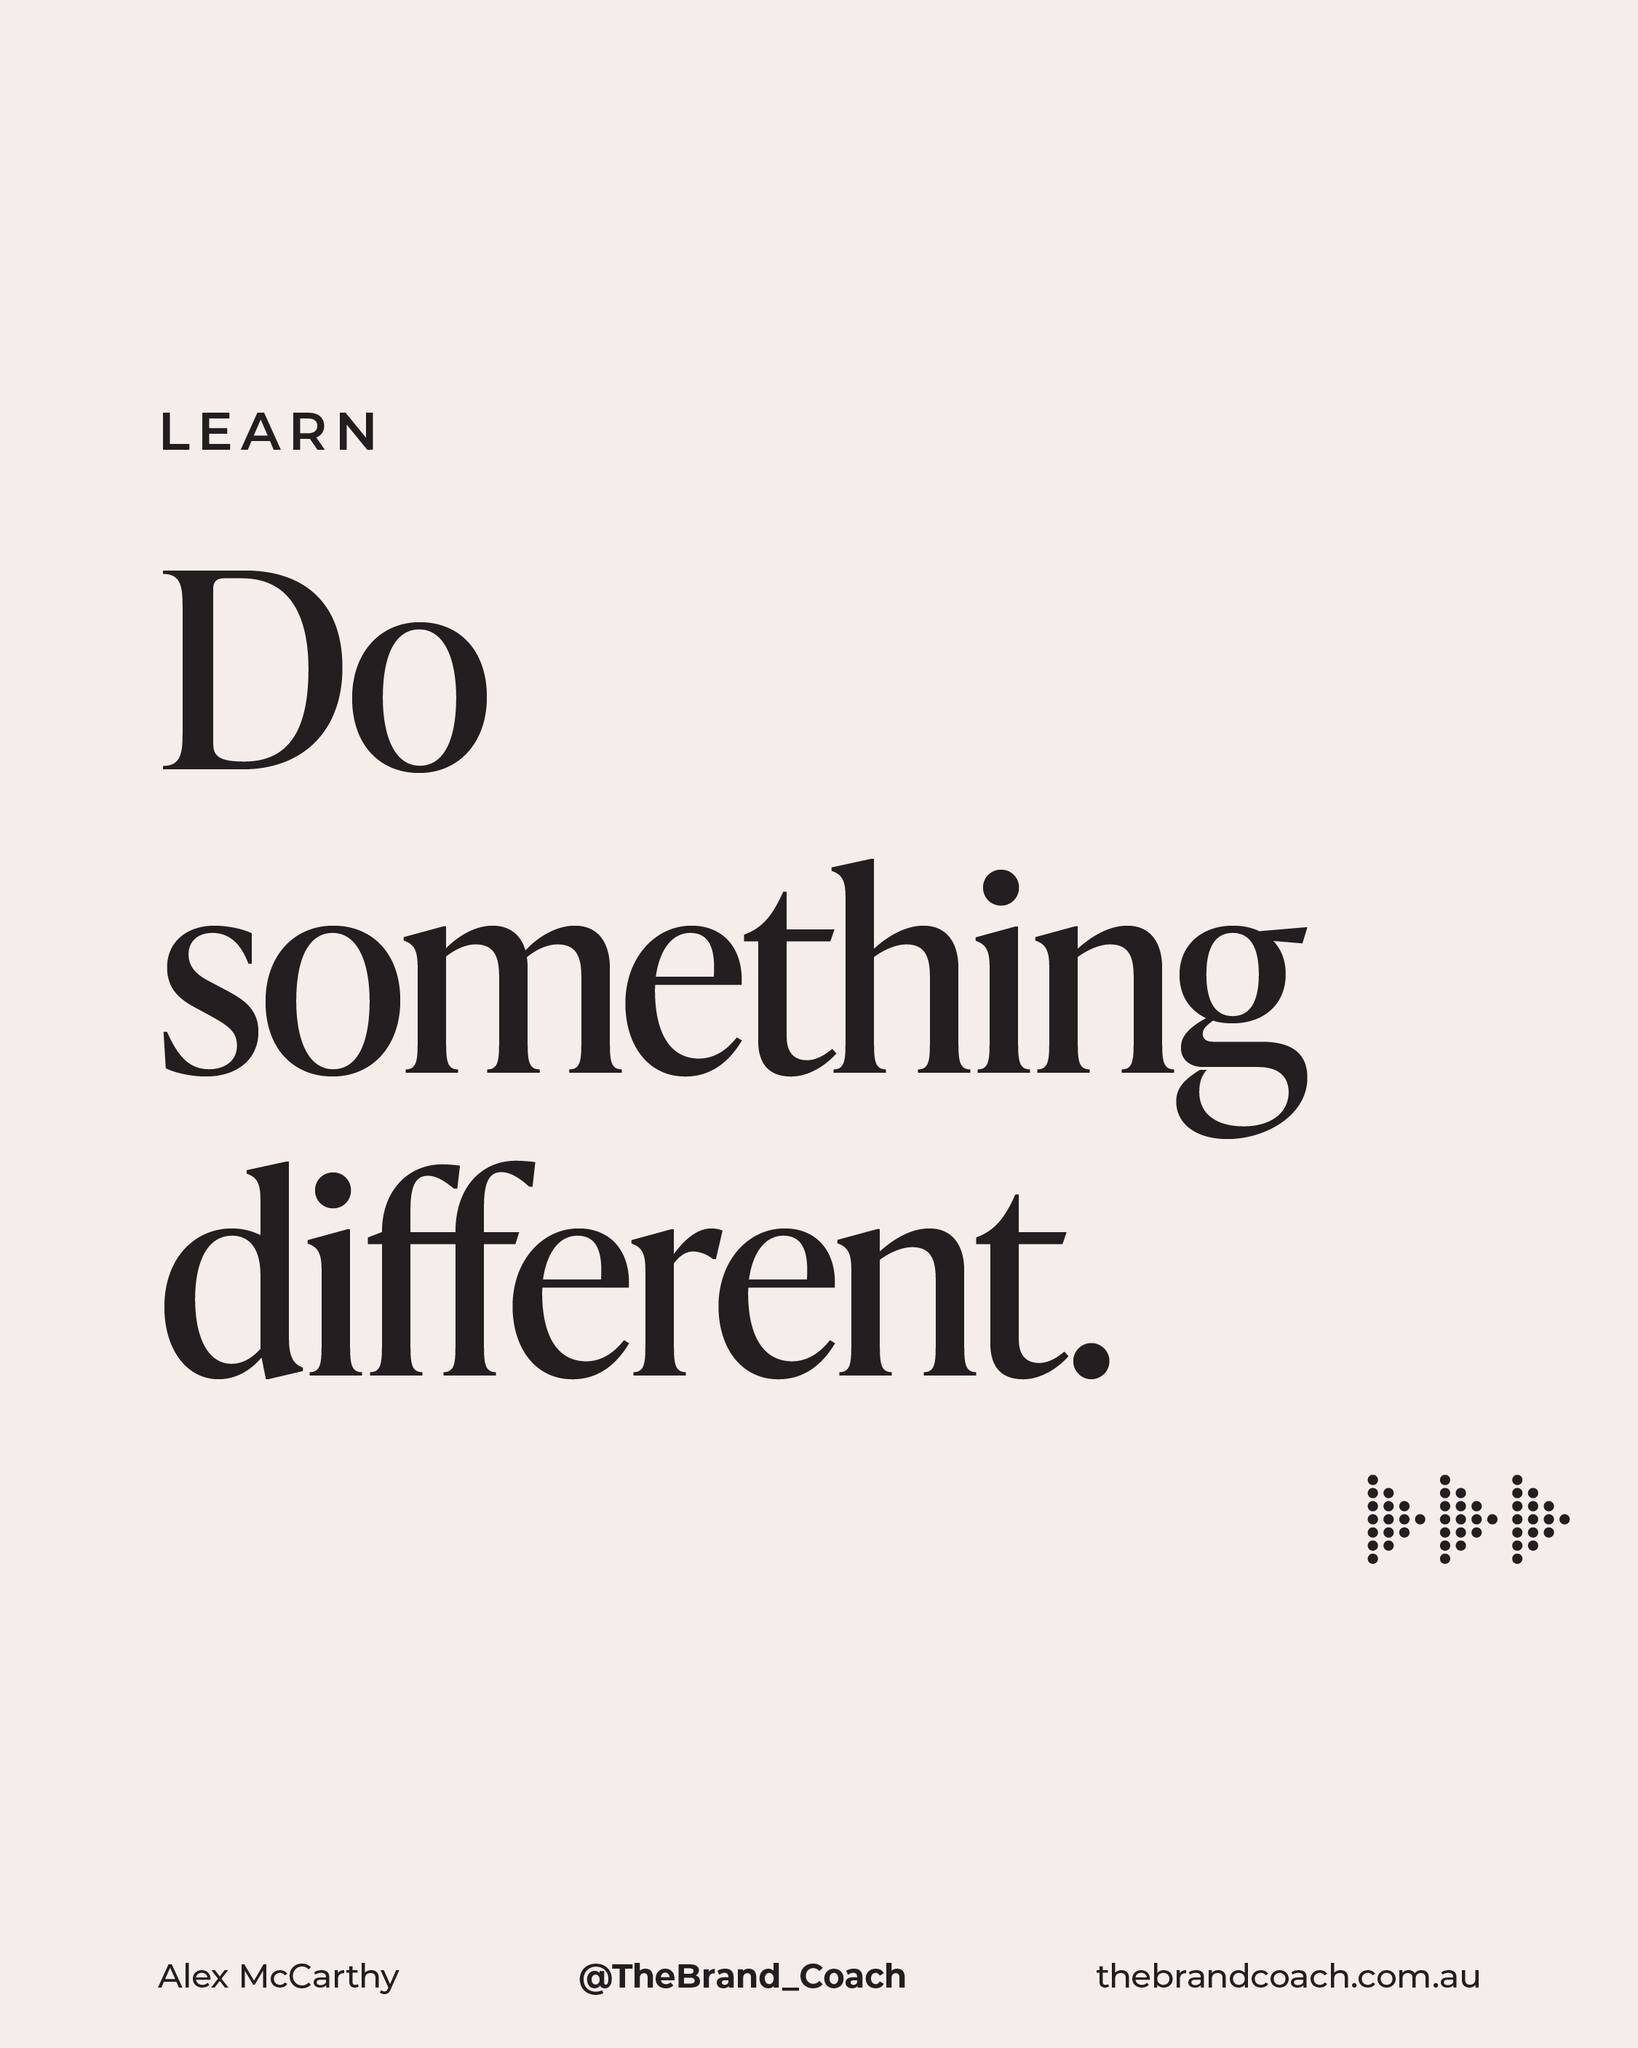 When it comes to branding, &ldquo;Do Something Different&rdquo; is my mantra ☀️

Here are a few reasons why 👀

#thebrandcoach #brandingtips #brandidentitydesign #branddesigner #brandidentity #brandcoaching #brandingstrategy #branding101 #businesschi